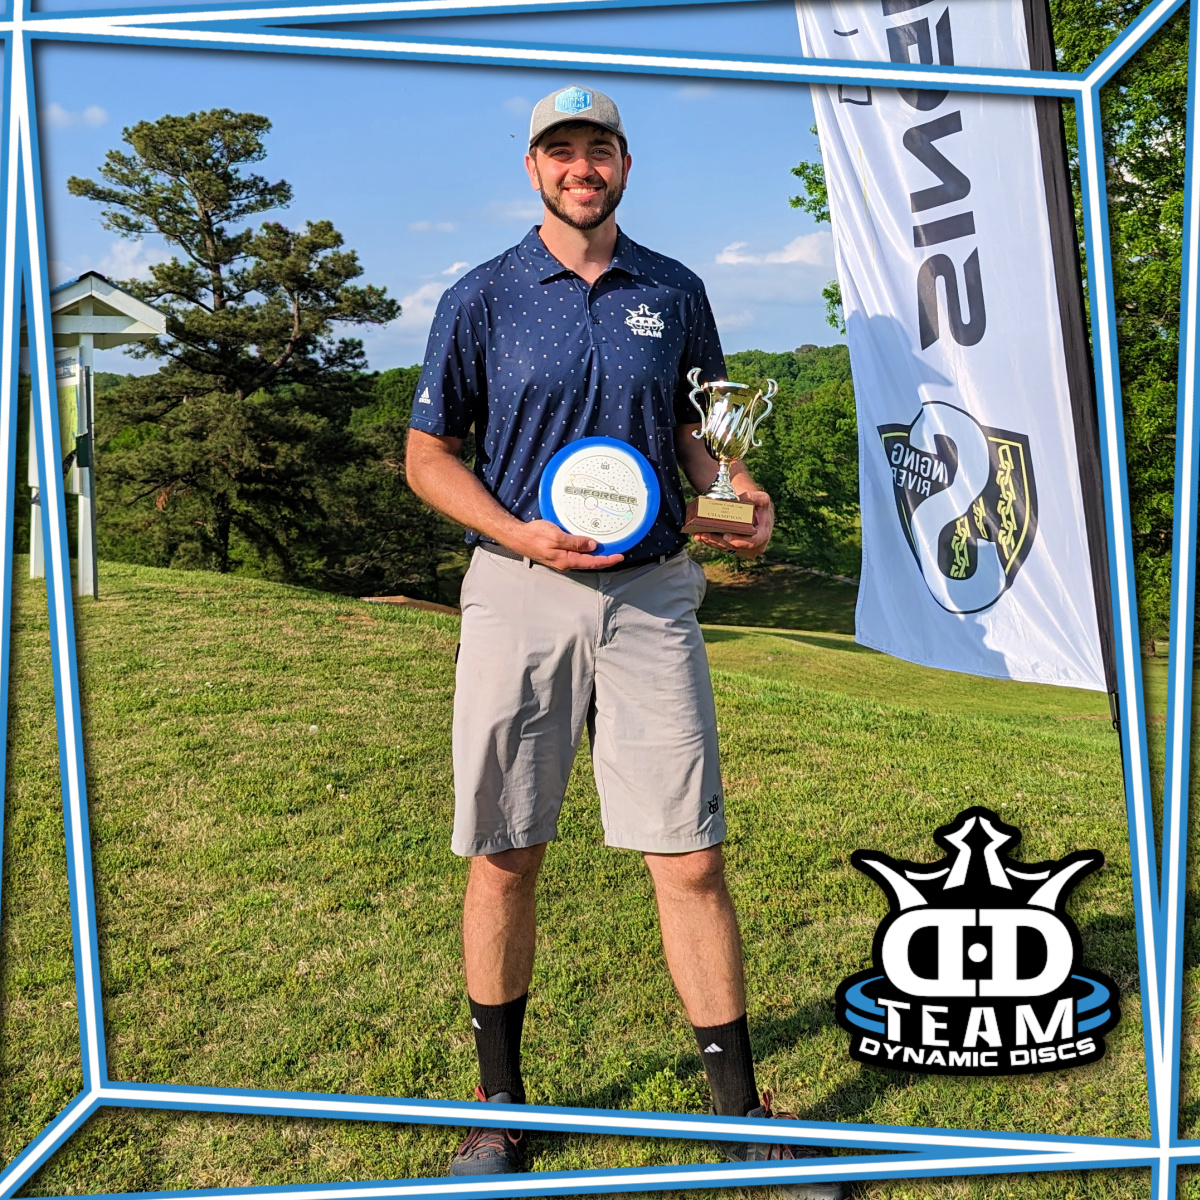 Please help us congratulate Jared Neal for his win at Cypress Creek Cup. Read what Jared shares about his performance. 👇 🧶1/4